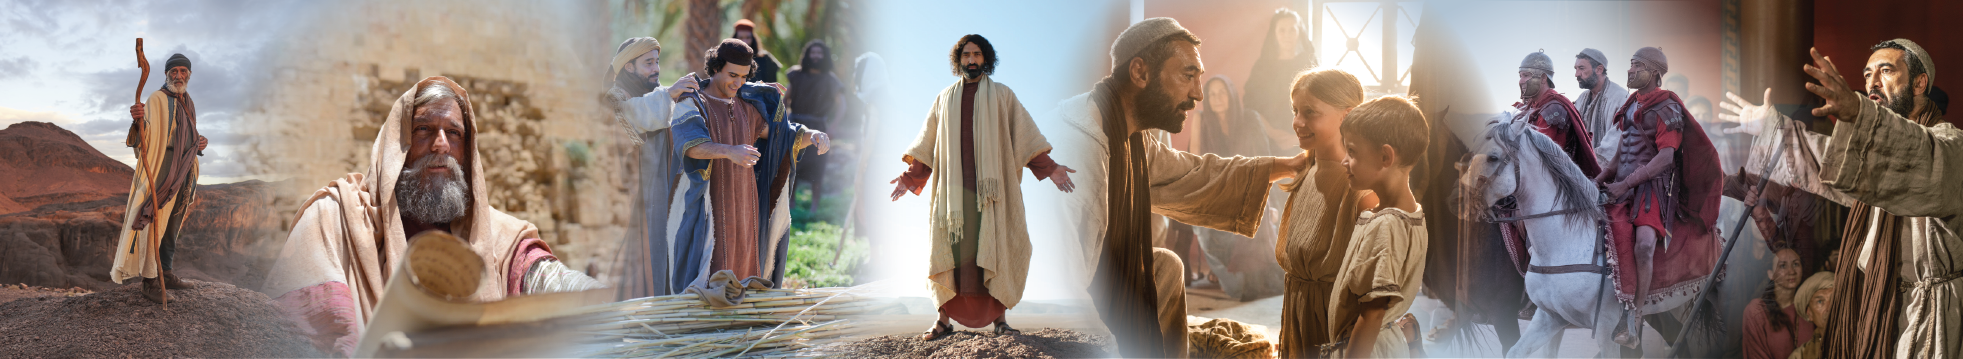 A collage of screenshots from Bible Media Group films.